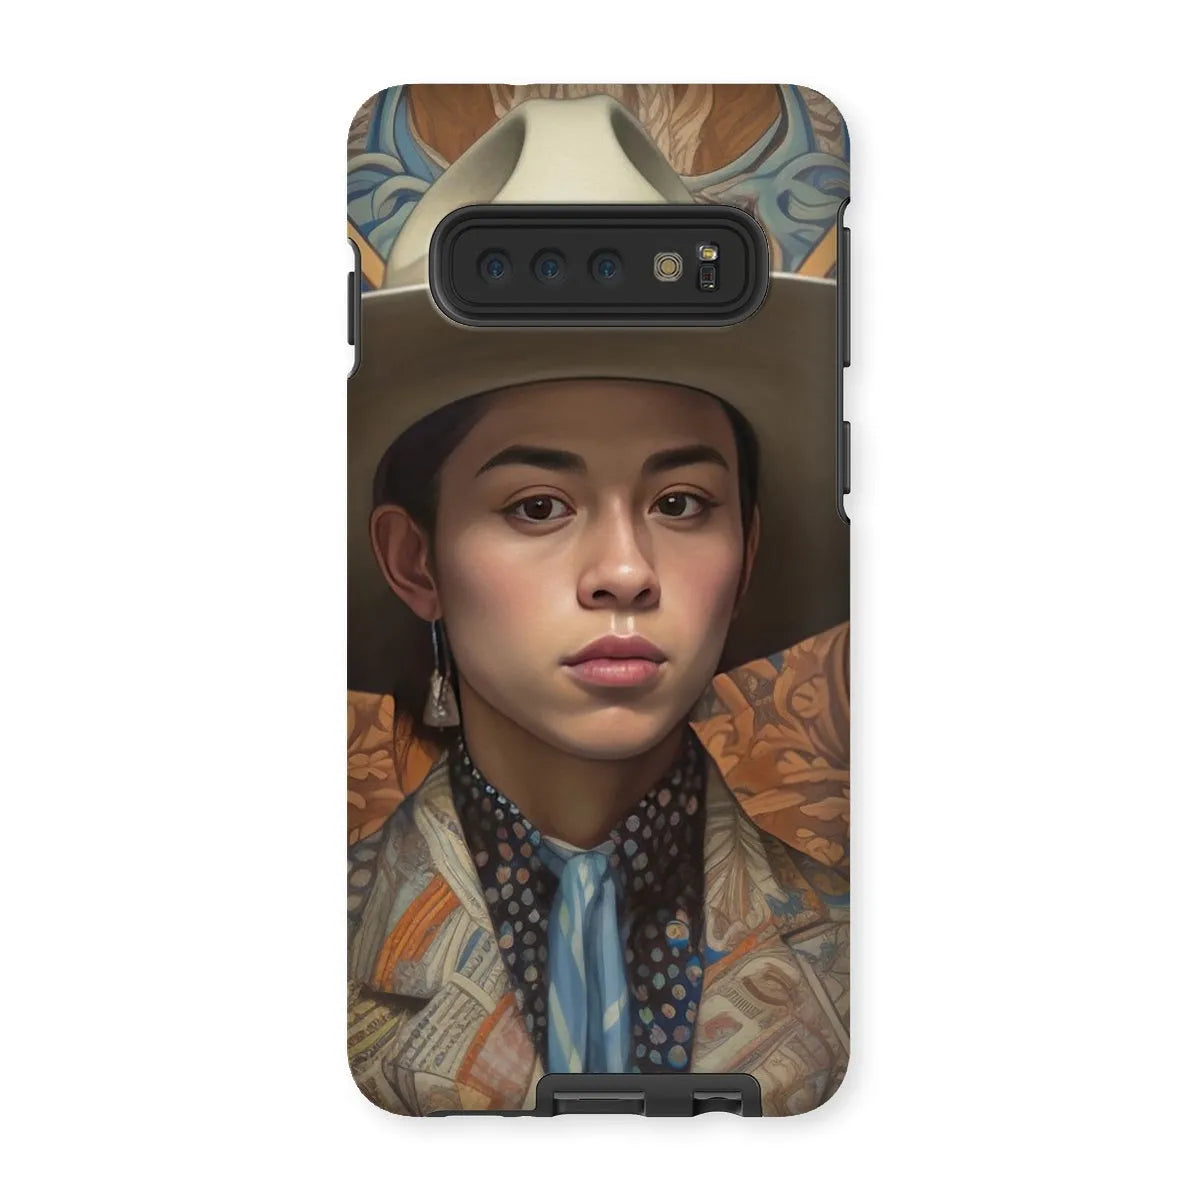 Angel The Transgender Cowboy - F2m Outlaw Art Phone Case - Samsung Galaxy S10 / Matte - Mobile Phone Cases - Aesthetic